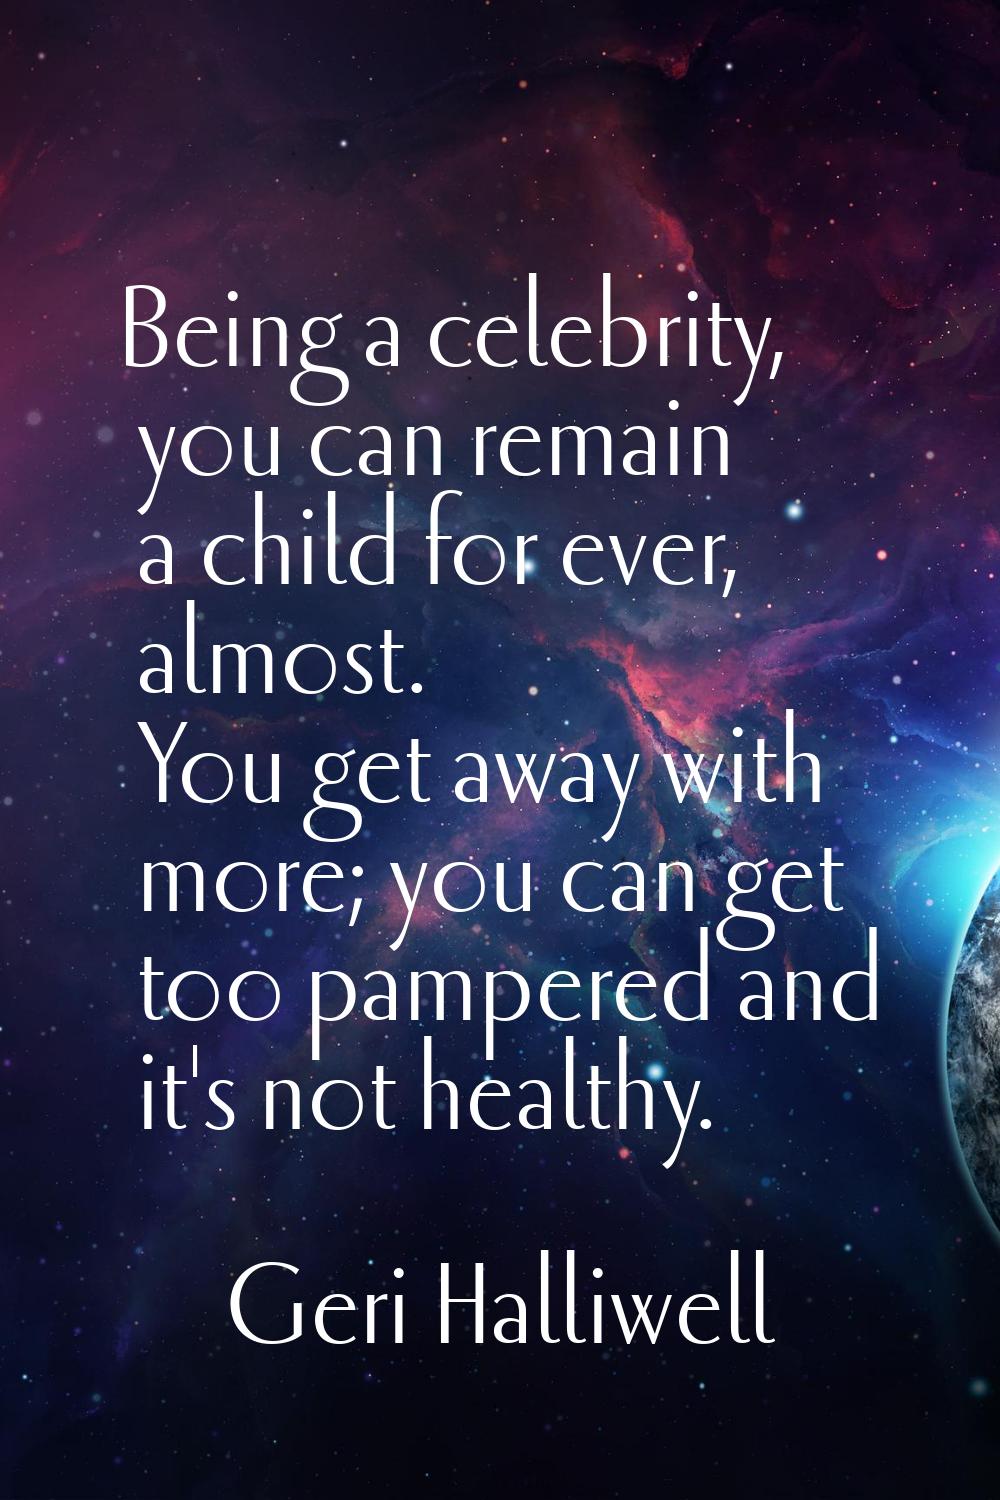 Being a celebrity, you can remain a child for ever, almost. You get away with more; you can get too